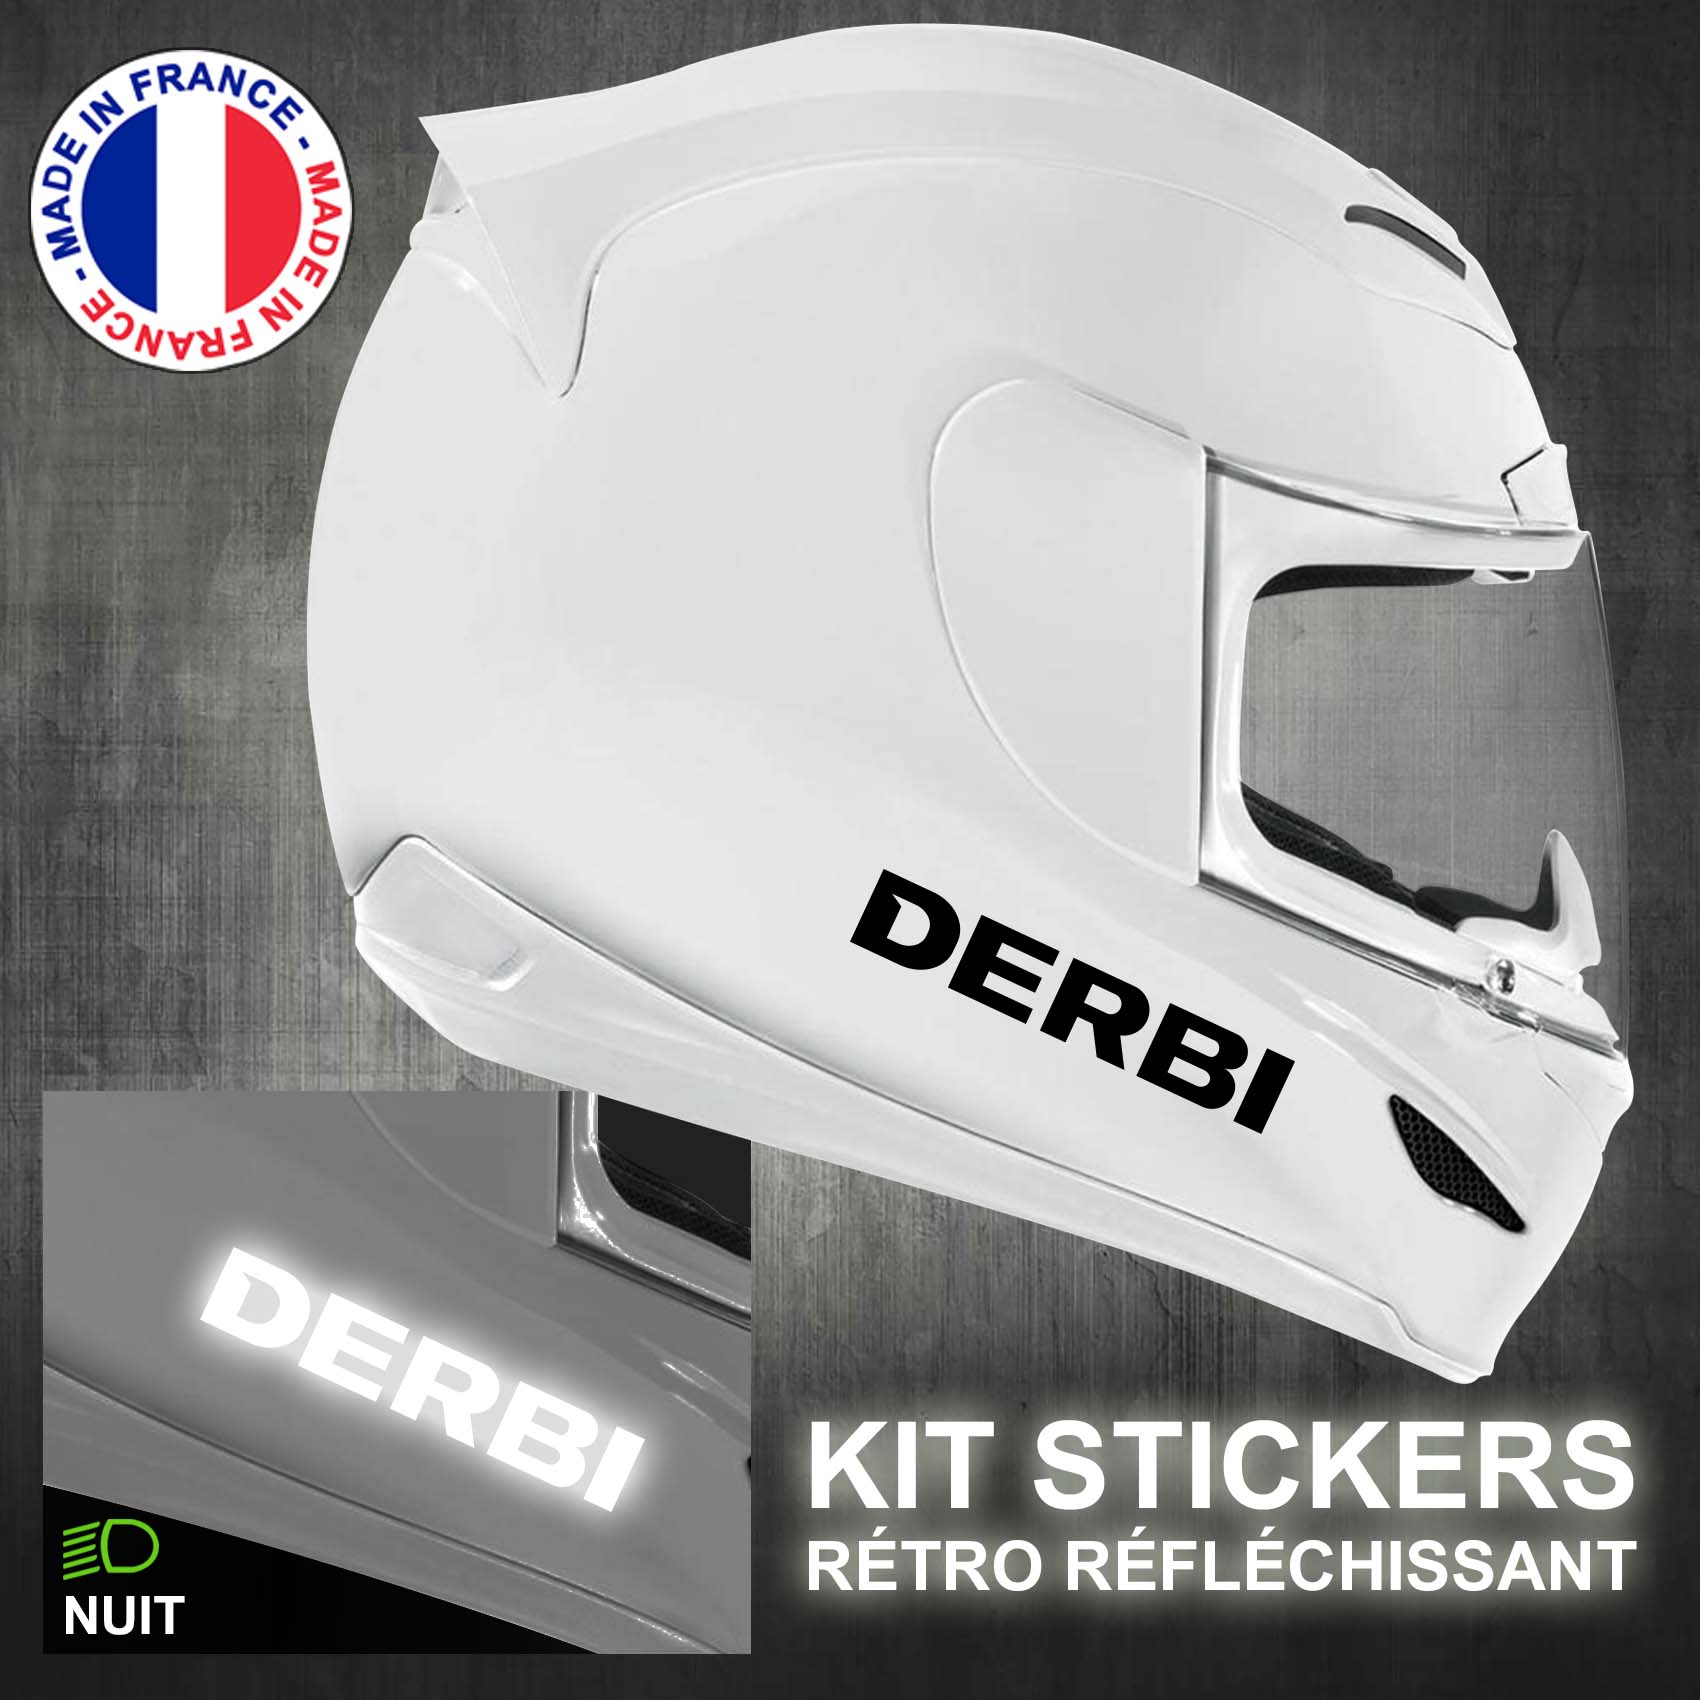 stickers-casque-moto-derbi-ref2-retro-reflechissant-autocollant-blanc-moto-velo-tuning-racing-route-sticker-casques-adhesif-scooter-nuit-securite-decals-personnalise-personnalisable-min